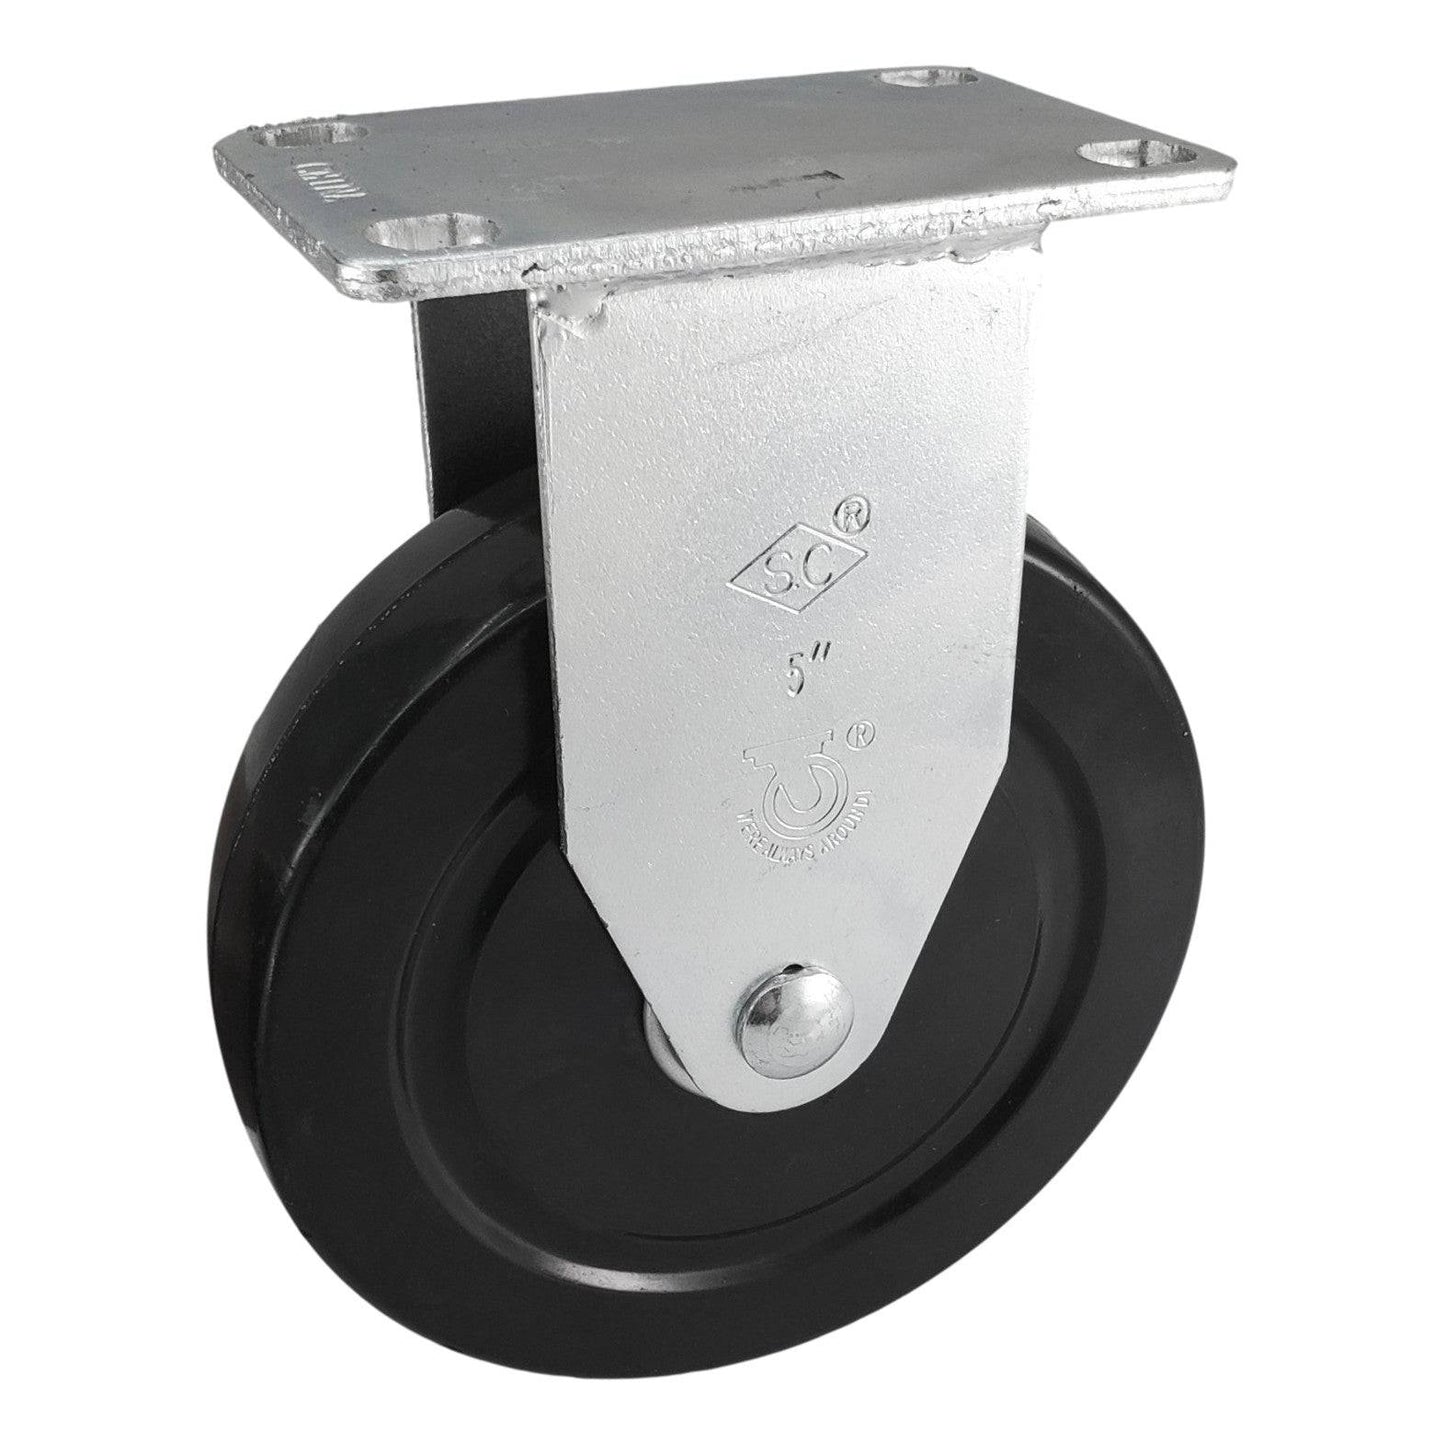 5" x 1-1/4" Hard Rubber Wheel Rigid Caster - 350 lbs. Capacity - Durable Superior Casters